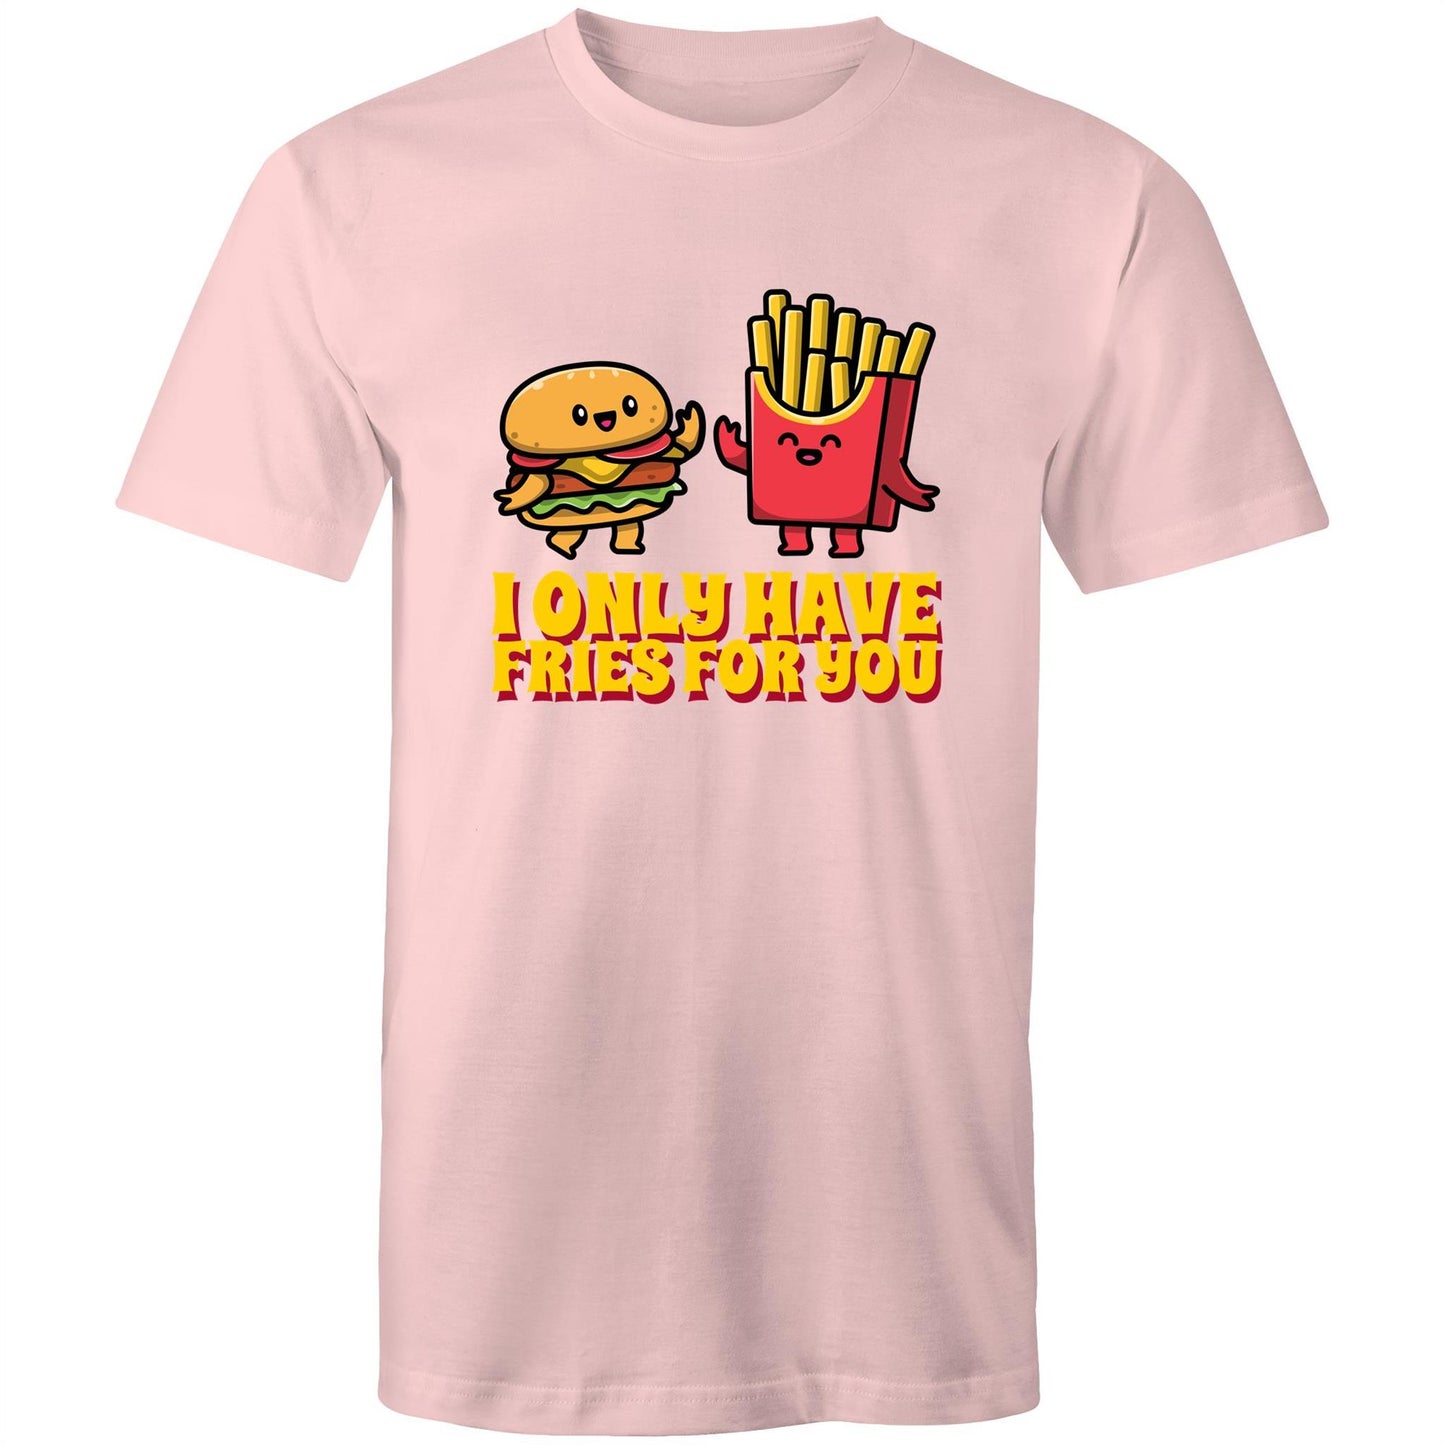 I Only Have Fries For You, Burger And Fries - Mens T-Shirt Pink Mens T-shirt